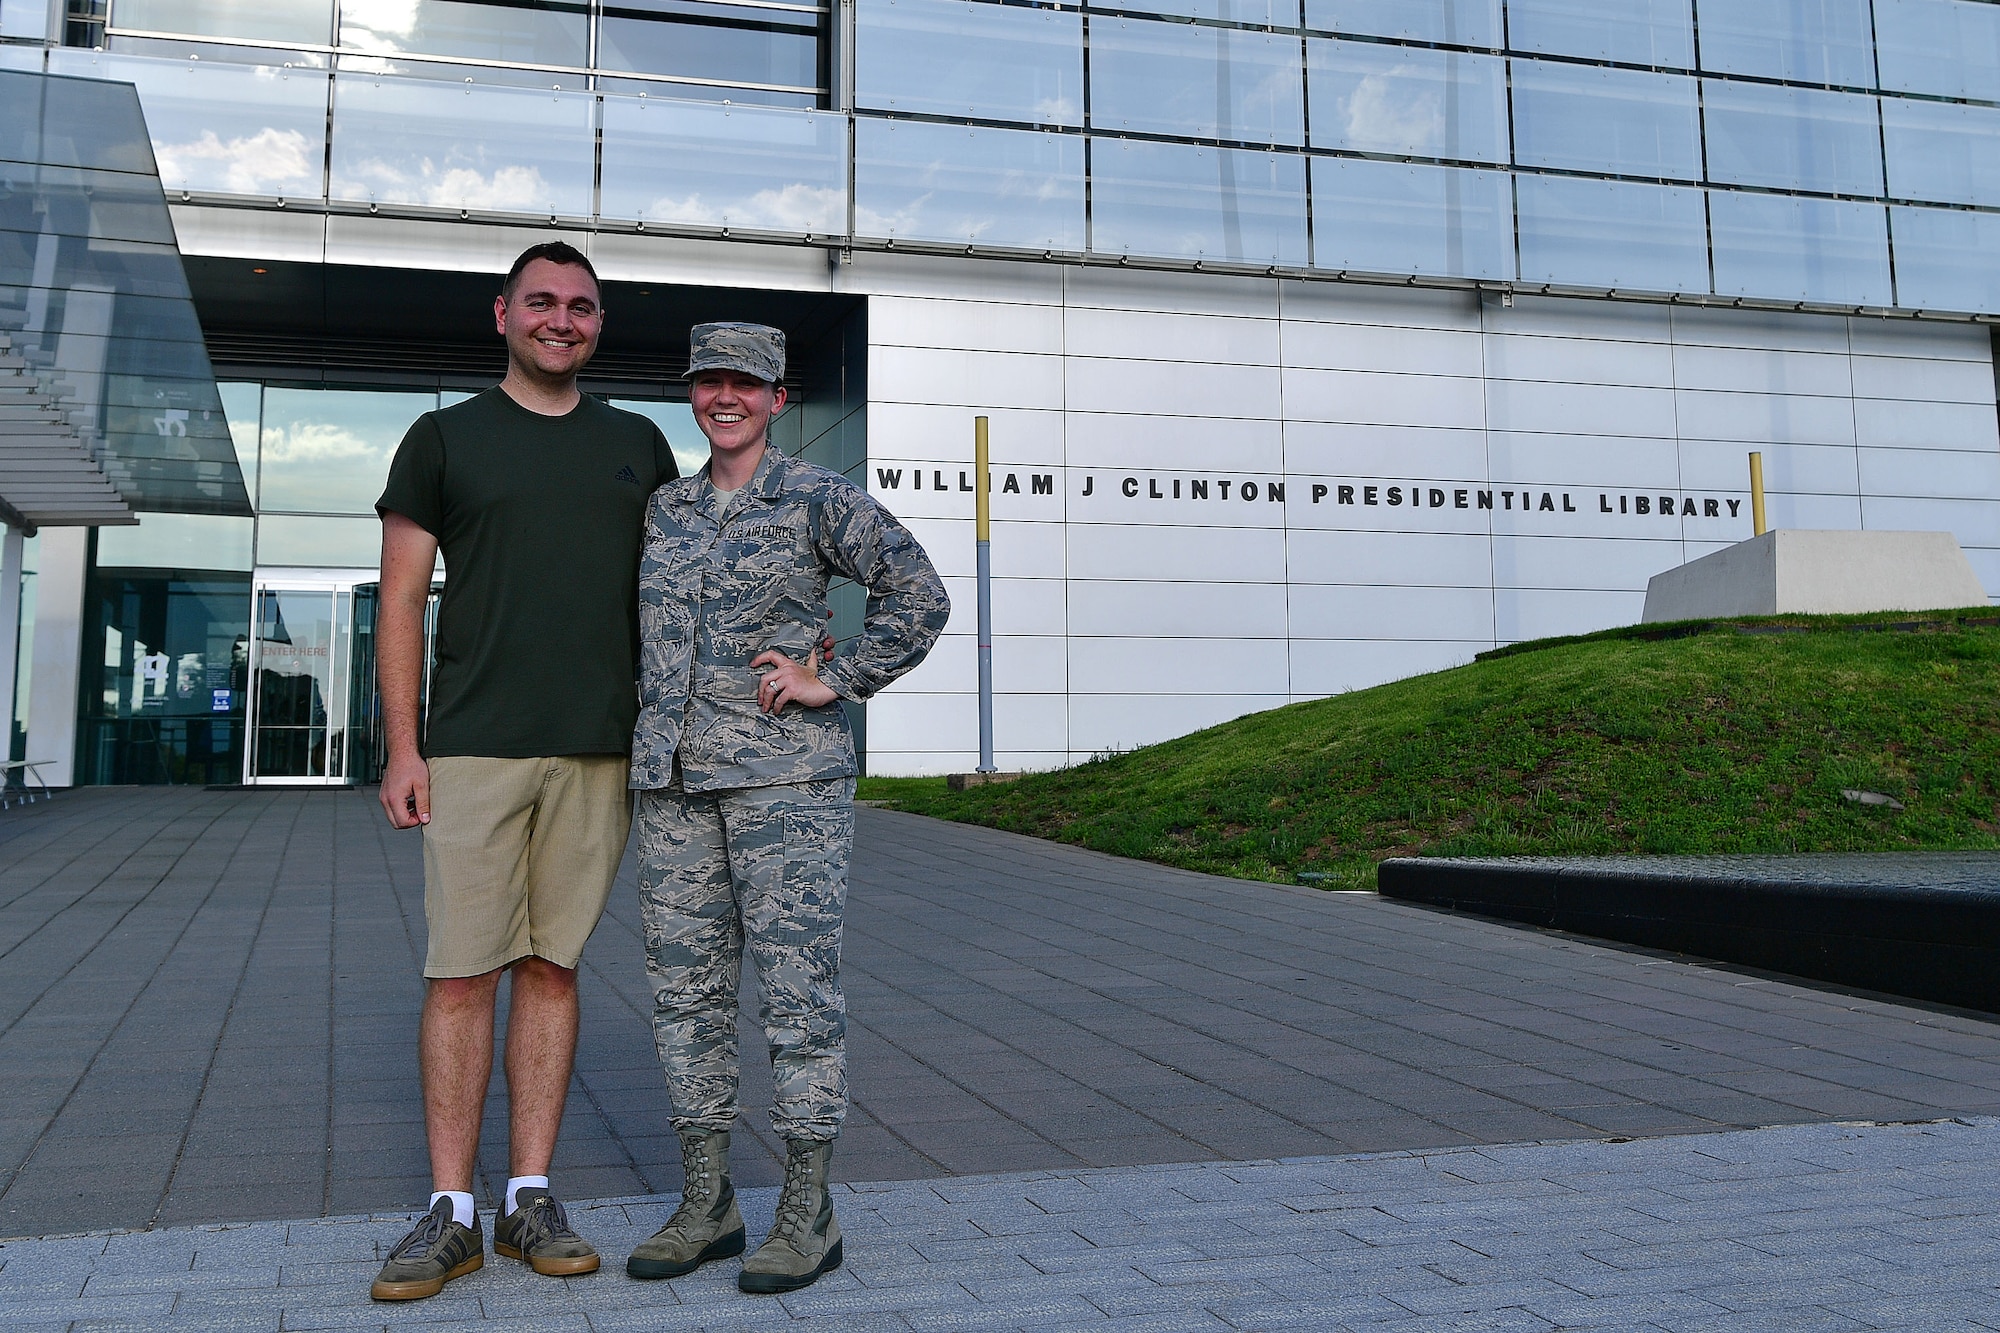 An Airman stands next to her husband in front of the library she will be interning at.